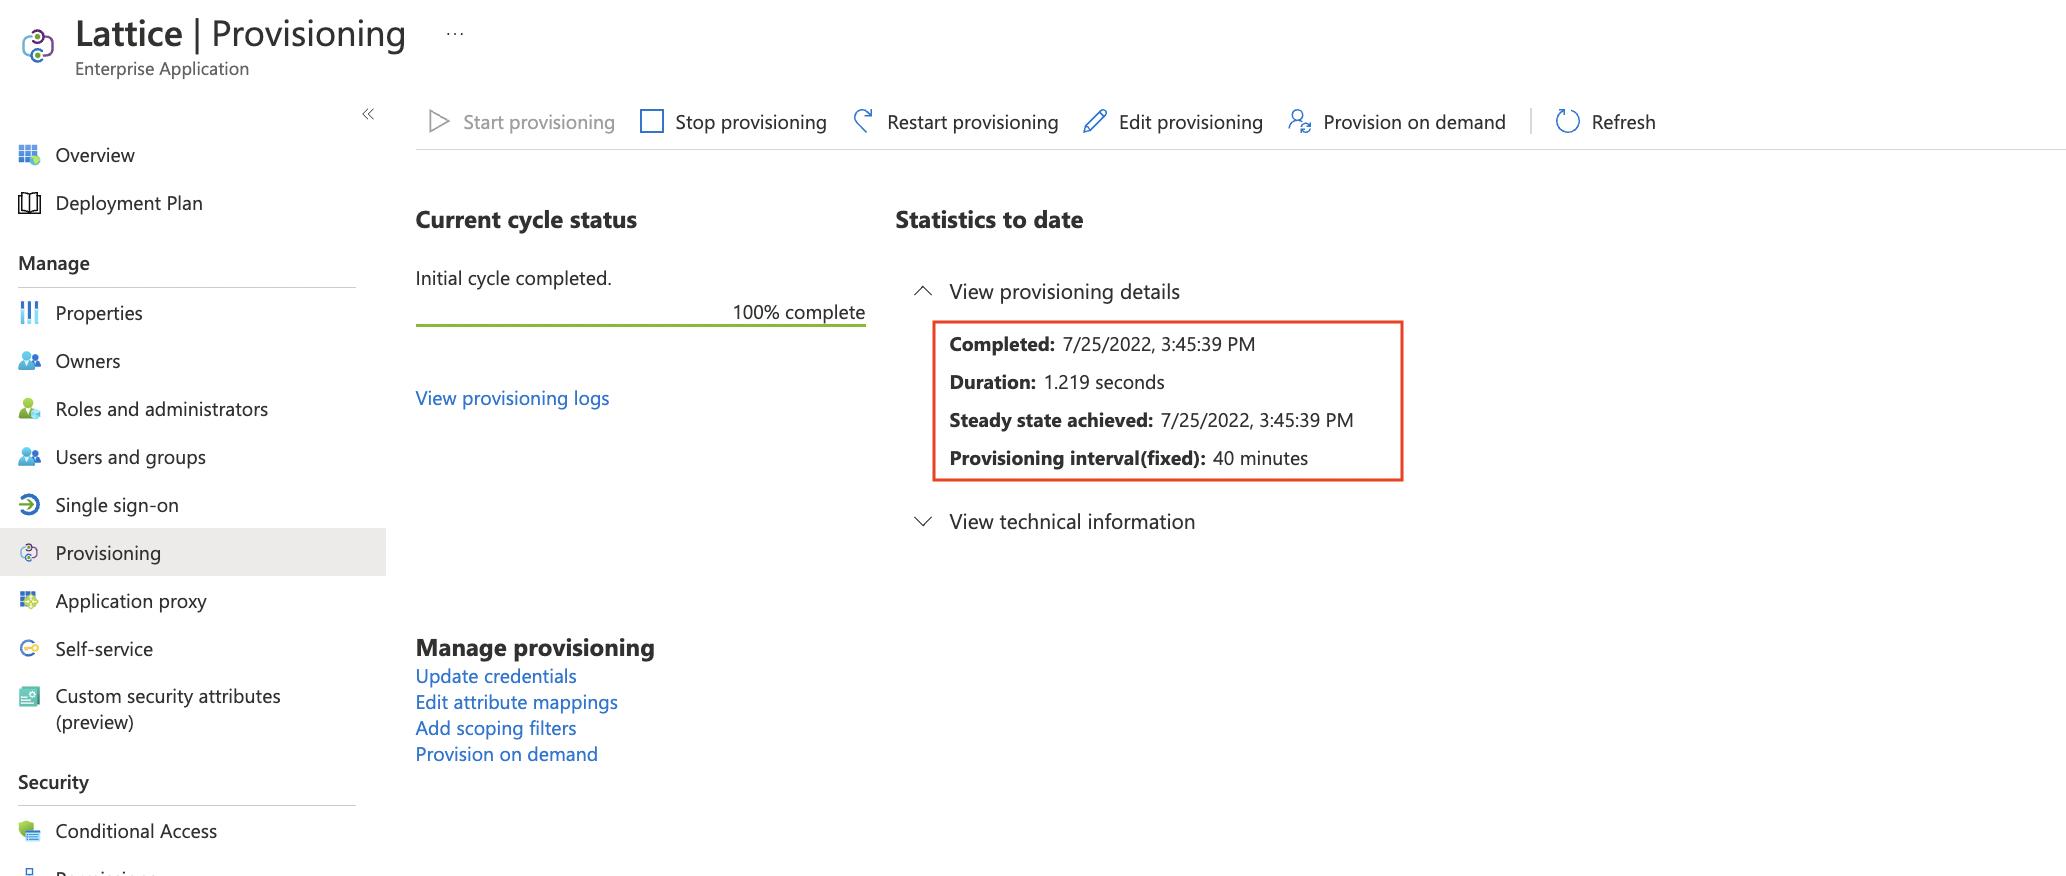 Image of Azure Provisioning page with a red square highlighting the provisioning details